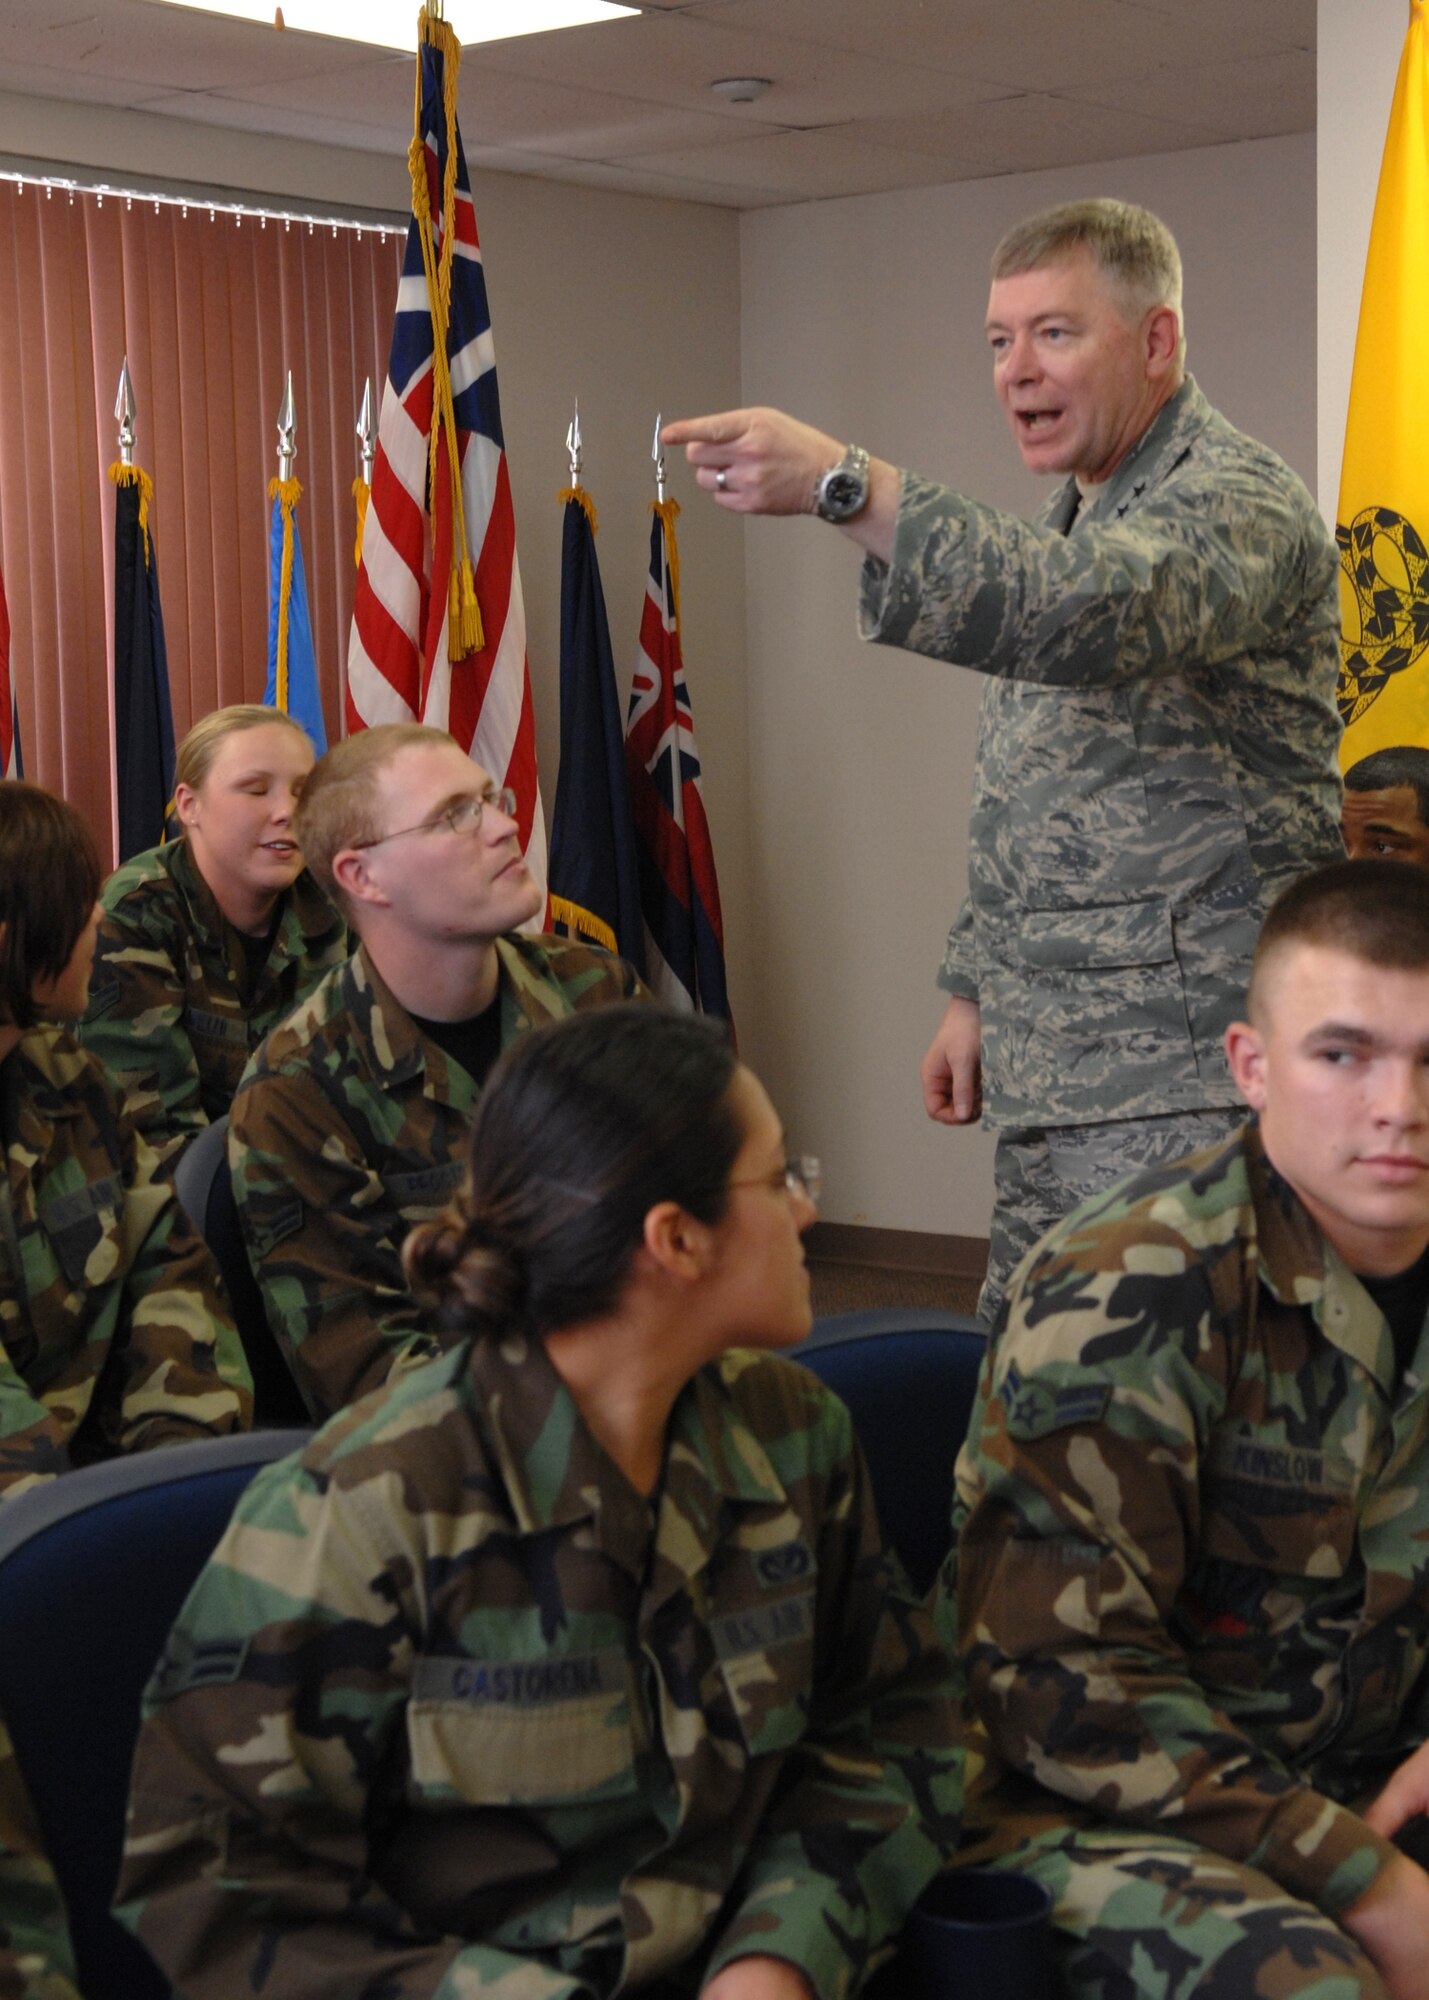 Maj. Gen. Kurt Cichowski, former Holloman wing commander and new Air Force Special Operations Command vice commander, talks with Airman Leadership School students about his time deployed to Iraq. (U.S. Air Force photo/Airman 1st Class Rachel Kocin)